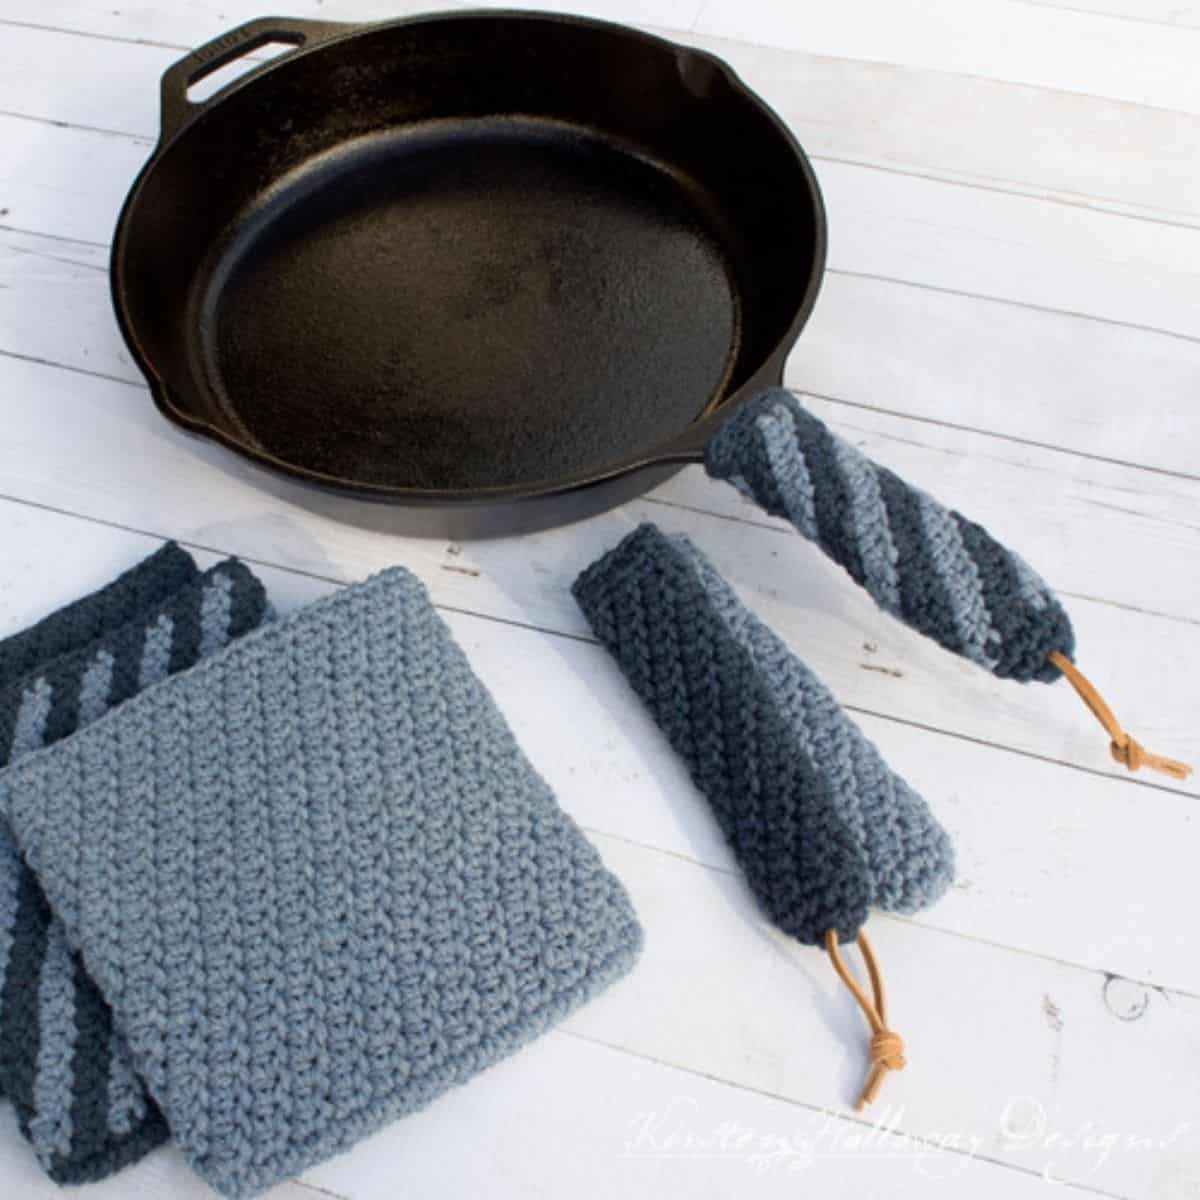 cast iron pan with a crochet handle covers and potholders sitting nearby